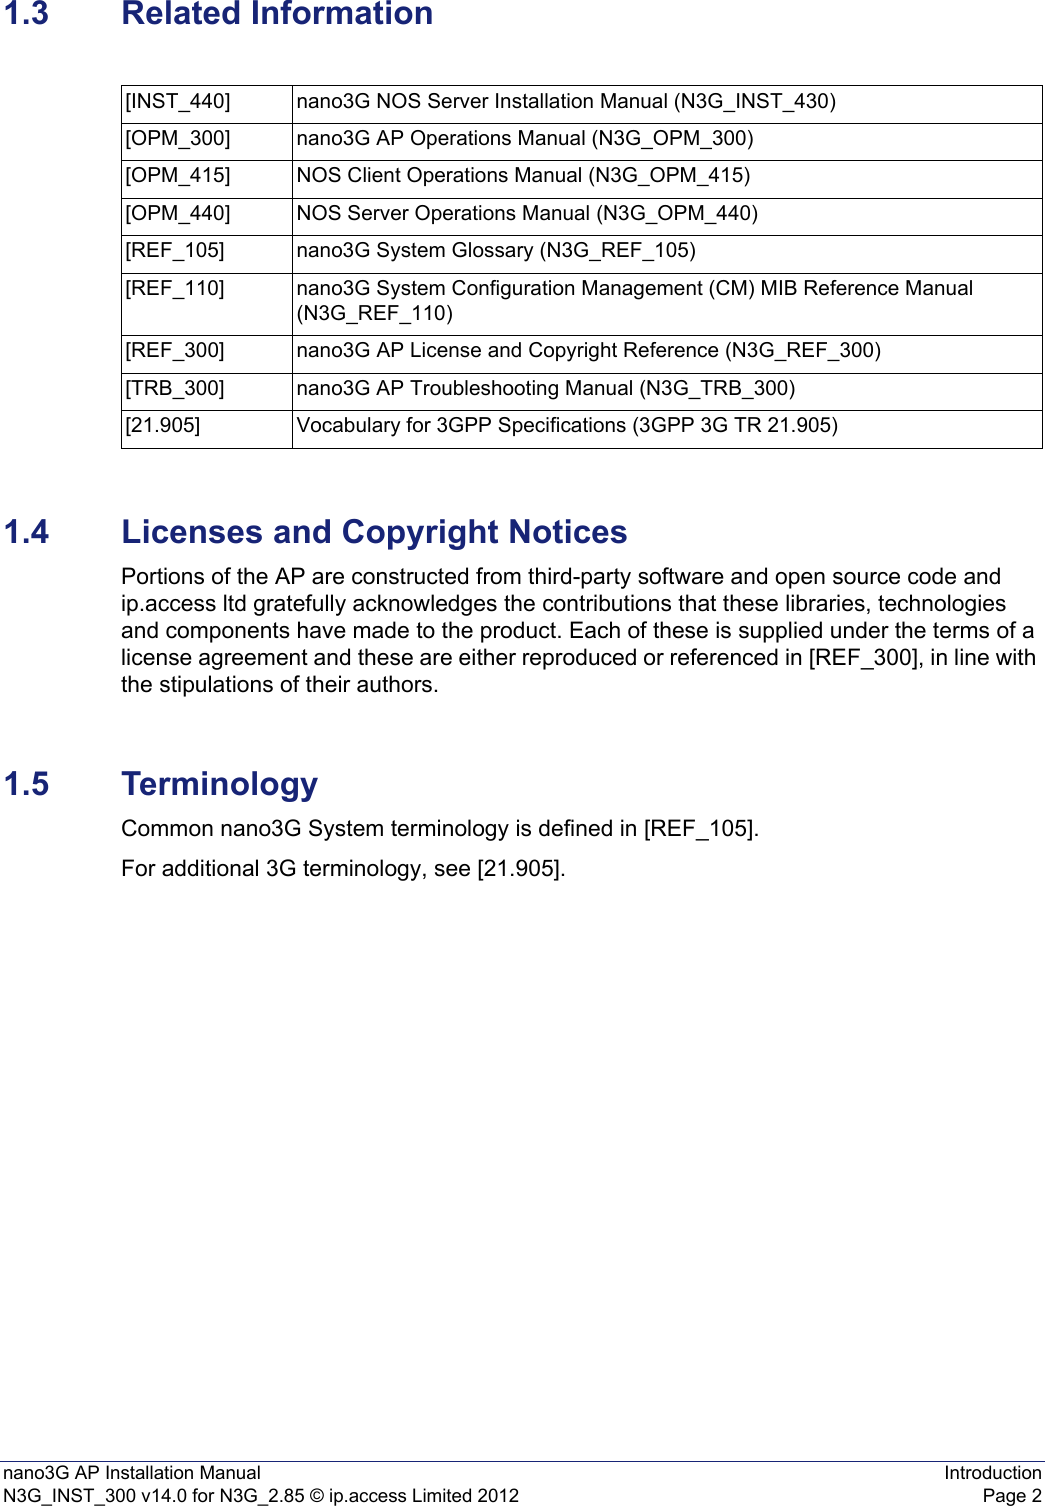 nano3G AP Installation Manual IntroductionN3G_INST_300 v14.0 for N3G_2.85 © ip.access Limited 2012 Page 21.3 Related Information1.4 Licenses and Copyright NoticesPortions of the AP are constructed from third-party software and open source code and ip.access ltd gratefully acknowledges the contributions that these libraries, technologies and components have made to the product. Each of these is supplied under the terms of a license agreement and these are either reproduced or referenced in [REF_300], in line with the stipulations of their authors.1.5 TerminologyCommon nano3G System terminology is defined in [REF_105].For additional 3G terminology, see [21.905].[INST_440] nano3G NOS Server Installation Manual (N3G_INST_430)[OPM_300] nano3G AP Operations Manual (N3G_OPM_300)[OPM_415] NOS Client Operations Manual (N3G_OPM_415)[OPM_440] NOS Server Operations Manual (N3G_OPM_440)[REF_105] nano3G System Glossary (N3G_REF_105)[REF_110] nano3G System Configuration Management (CM) MIB Reference Manual (N3G_REF_110)[REF_300] nano3G AP License and Copyright Reference (N3G_REF_300)[TRB_300] nano3G AP Troubleshooting Manual (N3G_TRB_300)[21.905] Vocabulary for 3GPP Specifications (3GPP 3G TR 21.905)